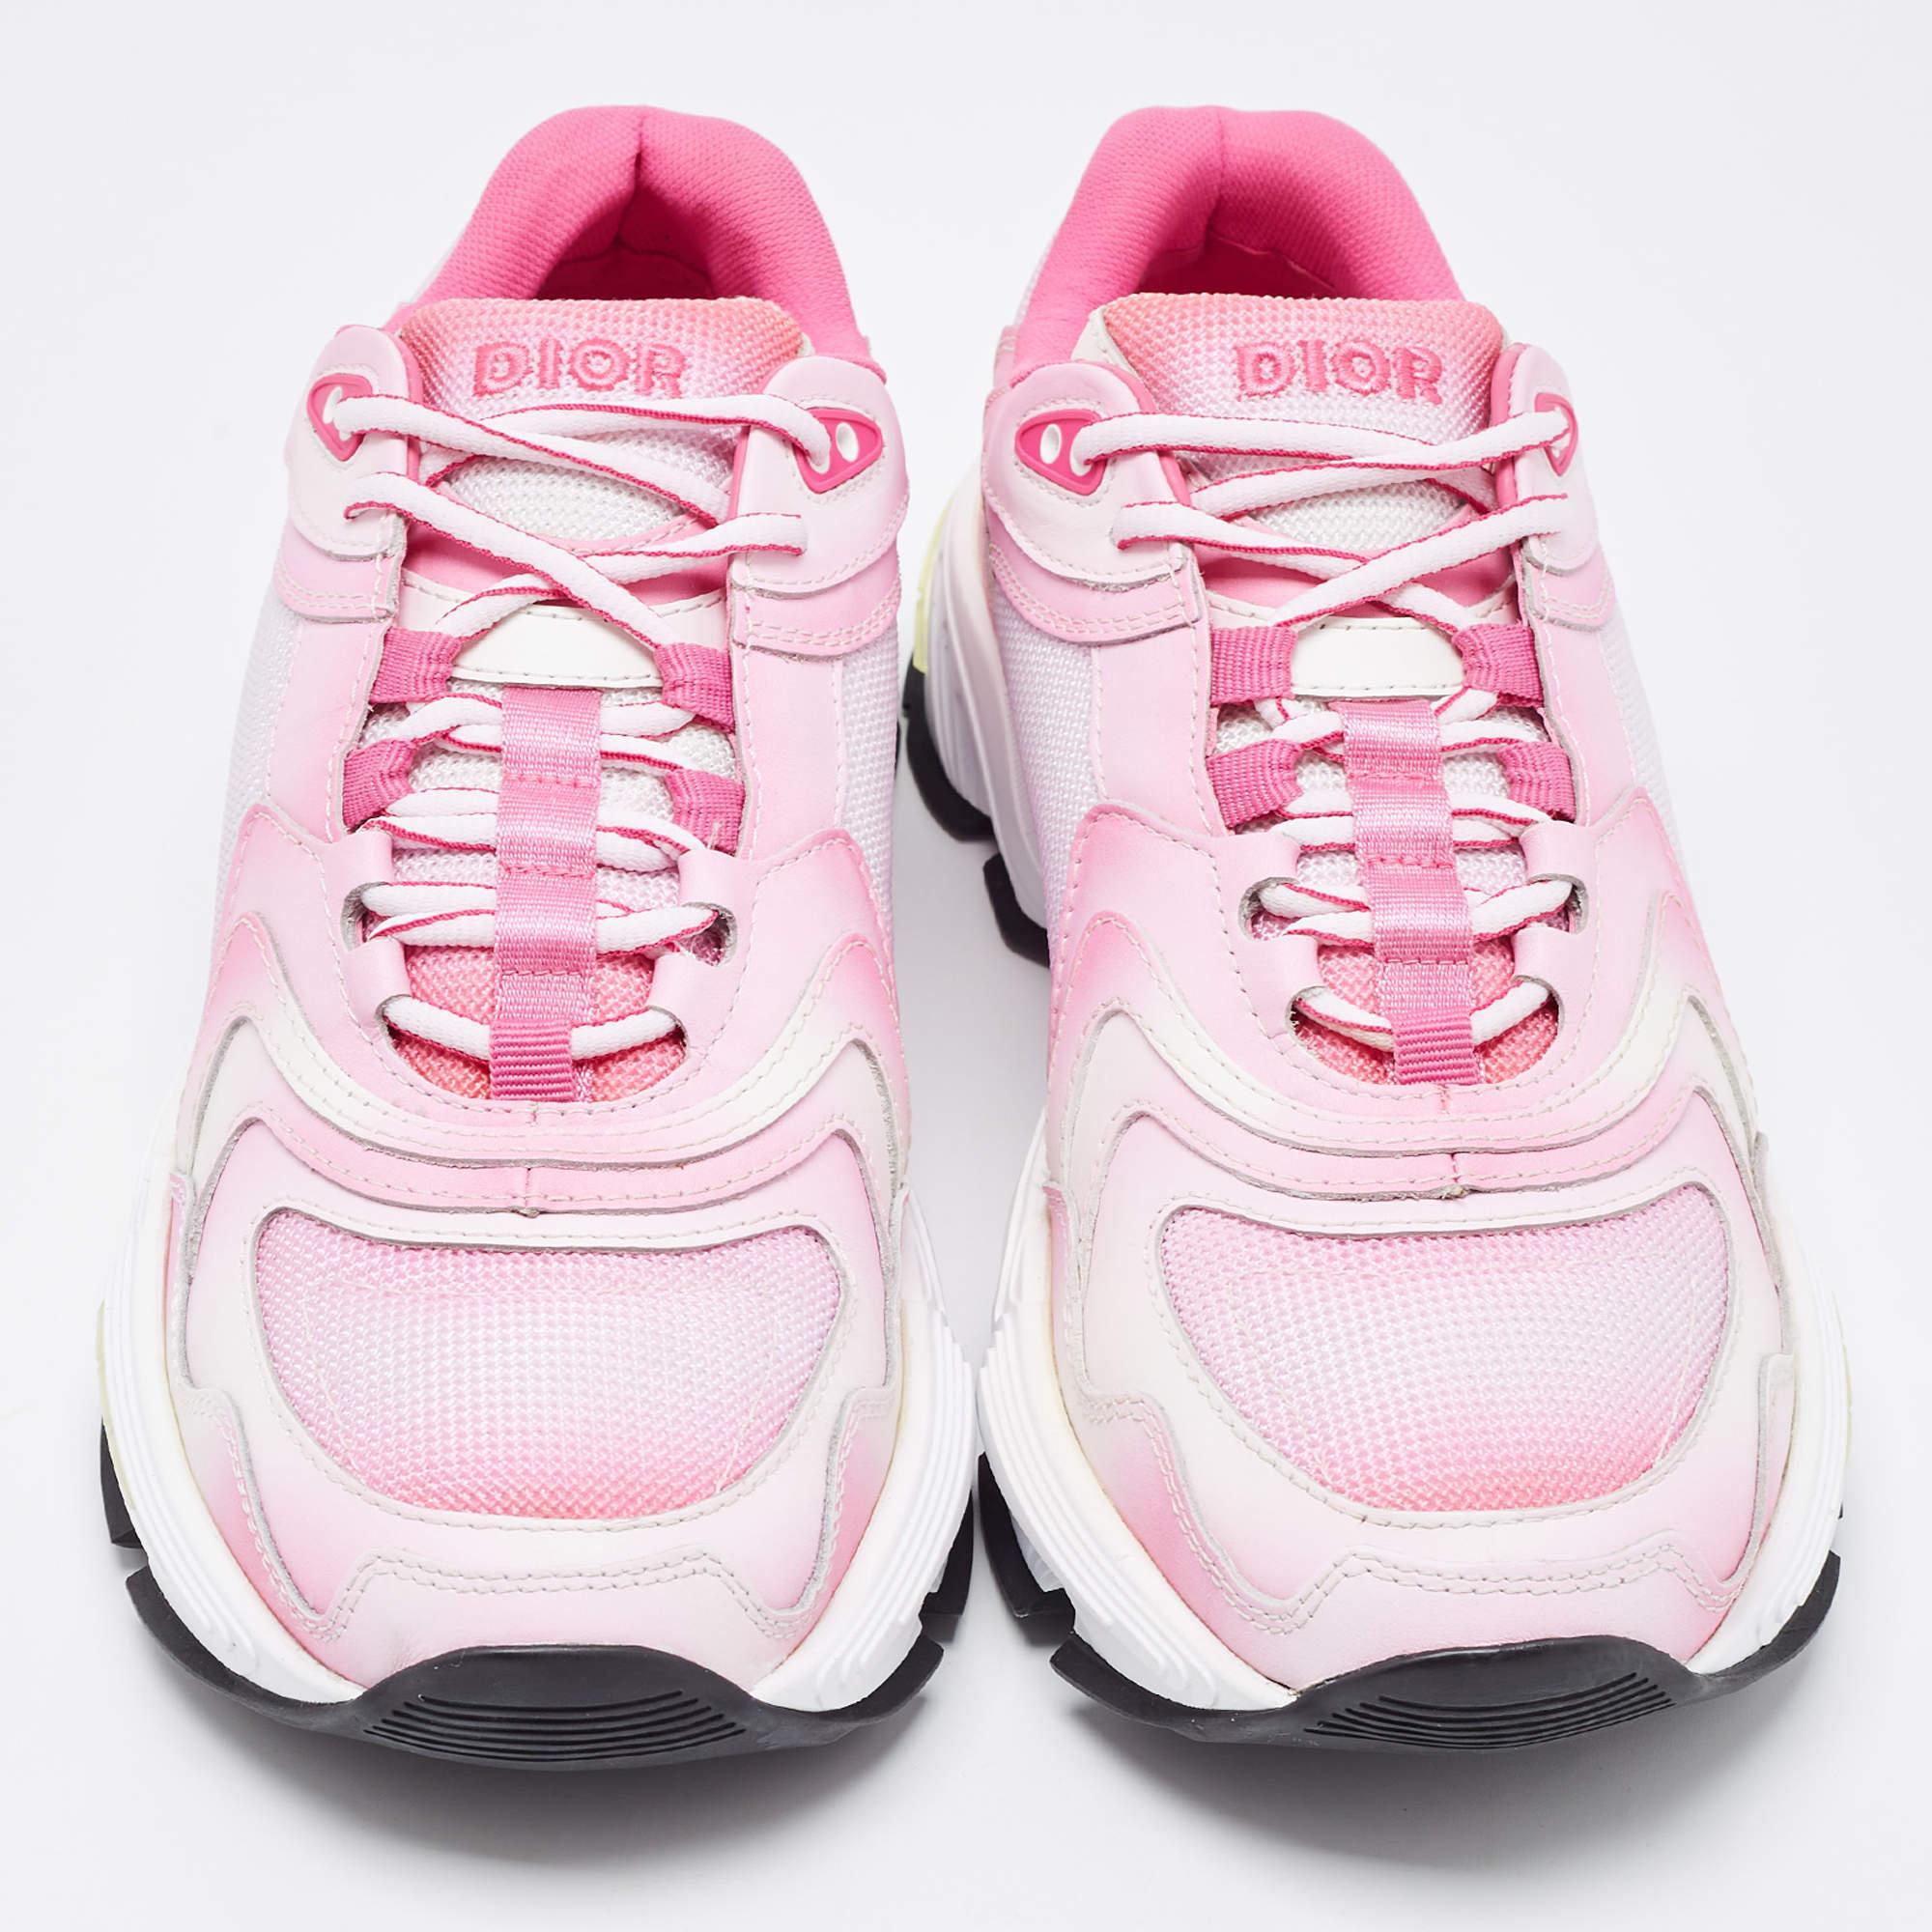 Upgrade your style with these Dior pink/white sneakers. Meticulously designed for fashion and comfort, they're the ideal choice for a trendy and comfortable stride.

Includes: Original Box, Extra Lace

